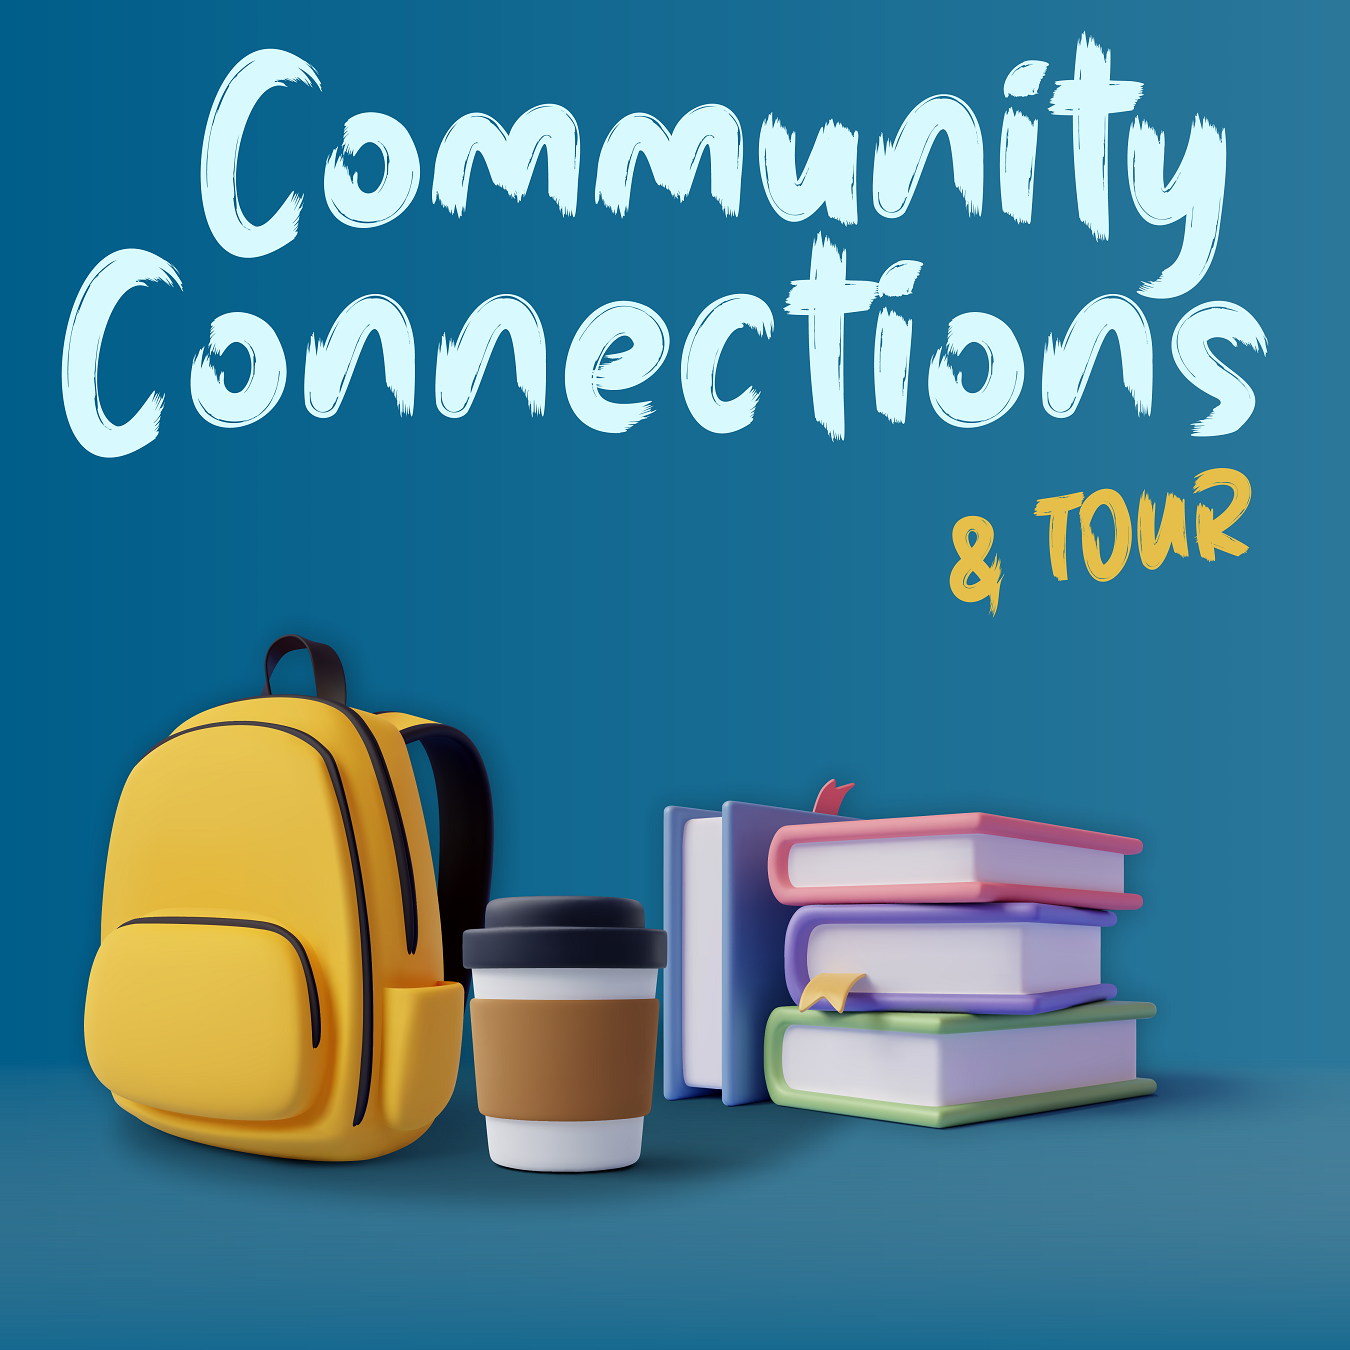 Image of backpack books and coffee for Community Connections  Tour events